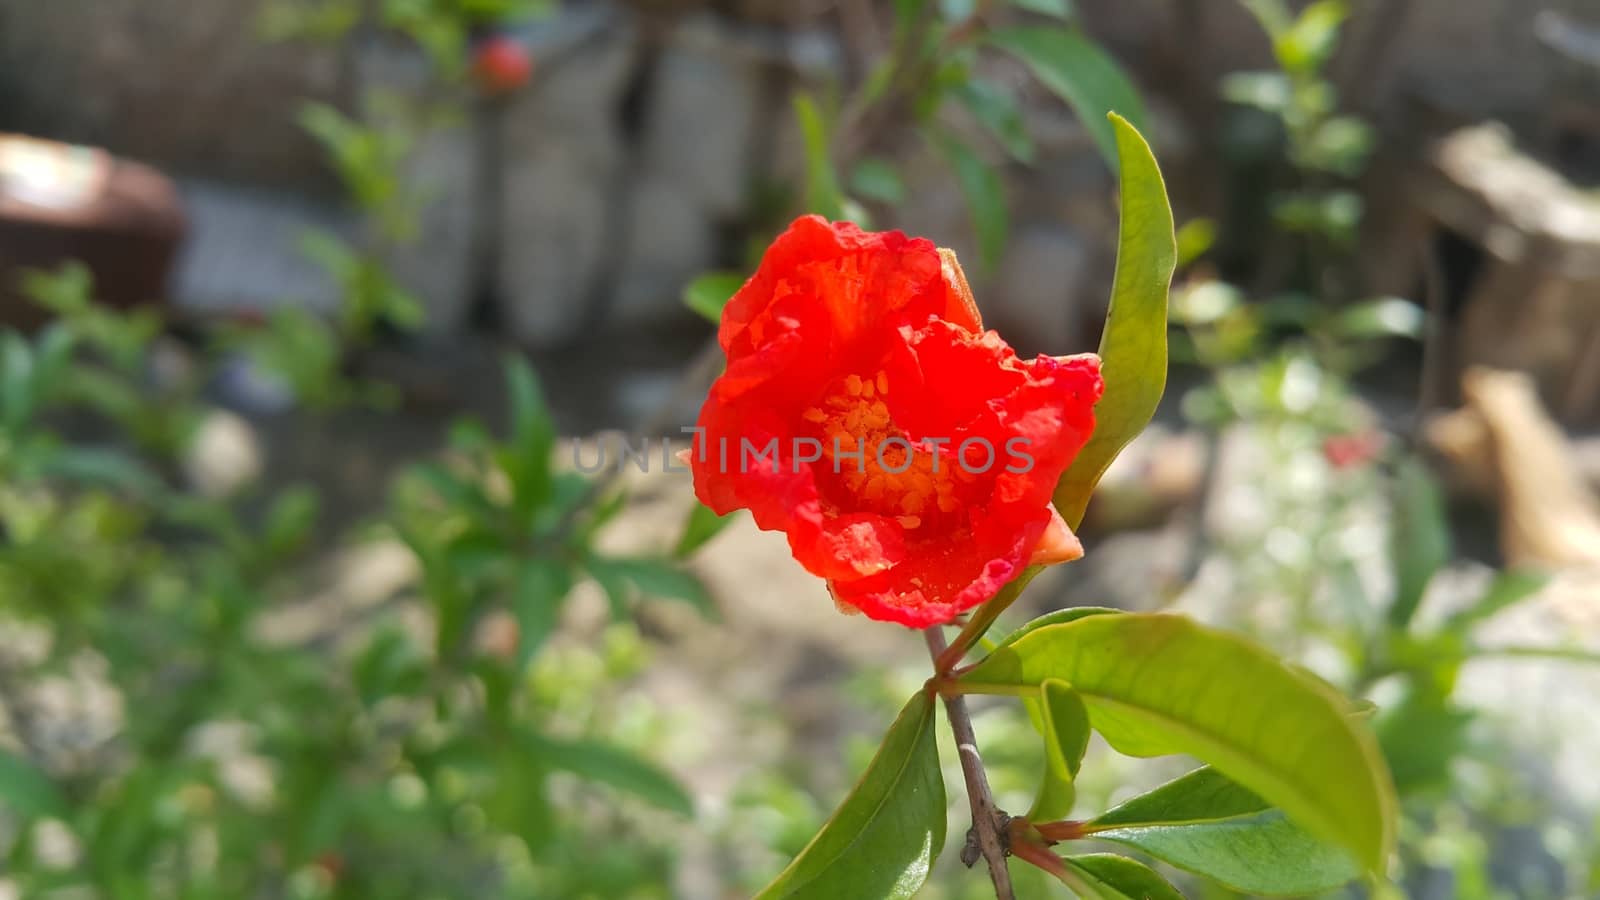 Red flower with stamens and green leaves in background by Photochowk